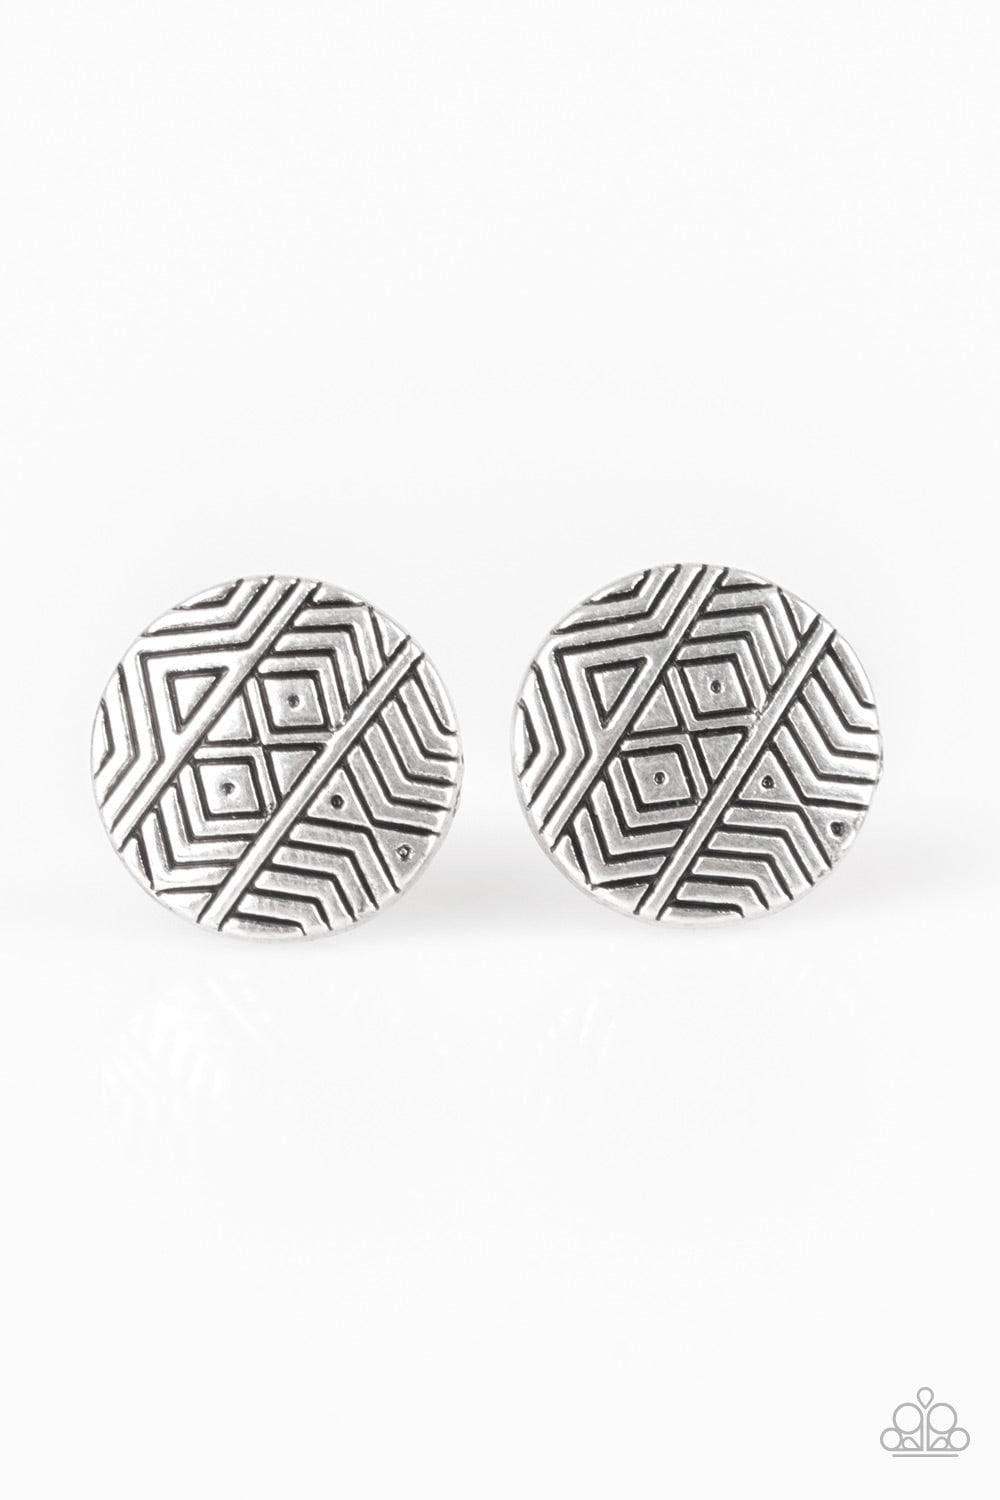 Paparazzi Accessories - Bright As a Button - Silver Post Earrings - Bling by JessieK